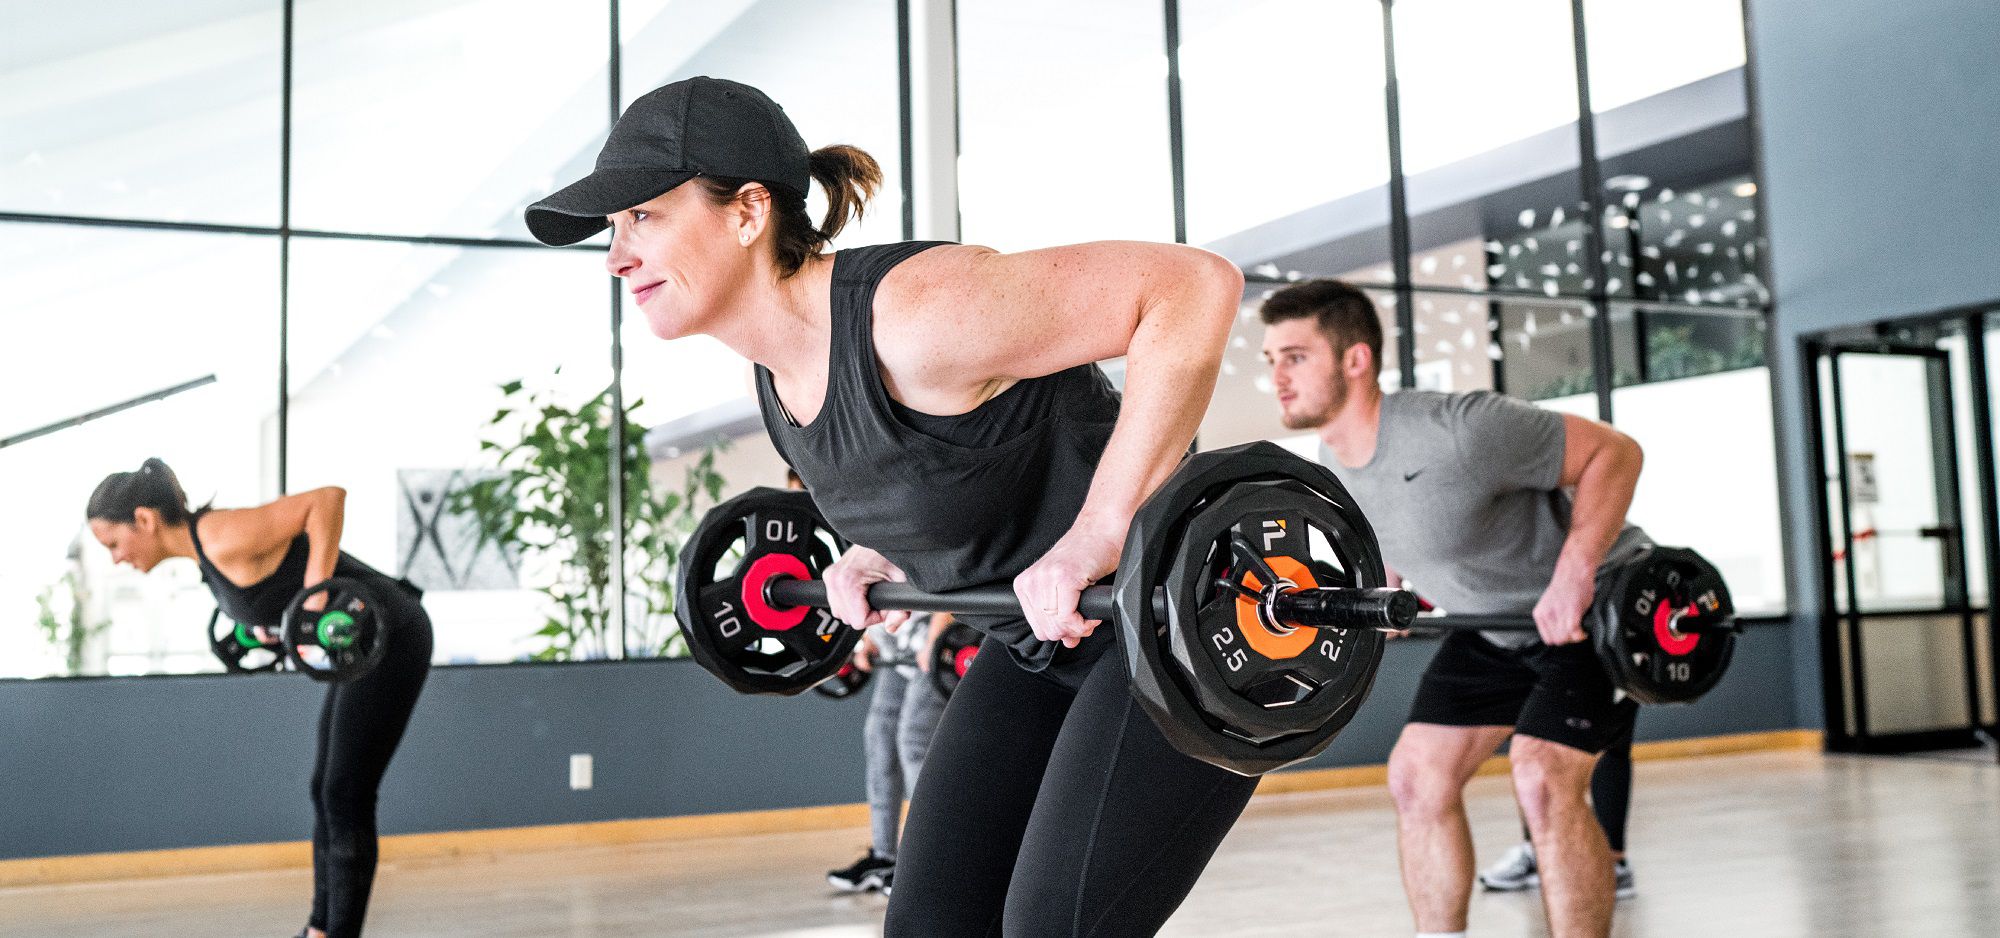 woman in a hat lifting a barbell with weights and other people in the background doing the same